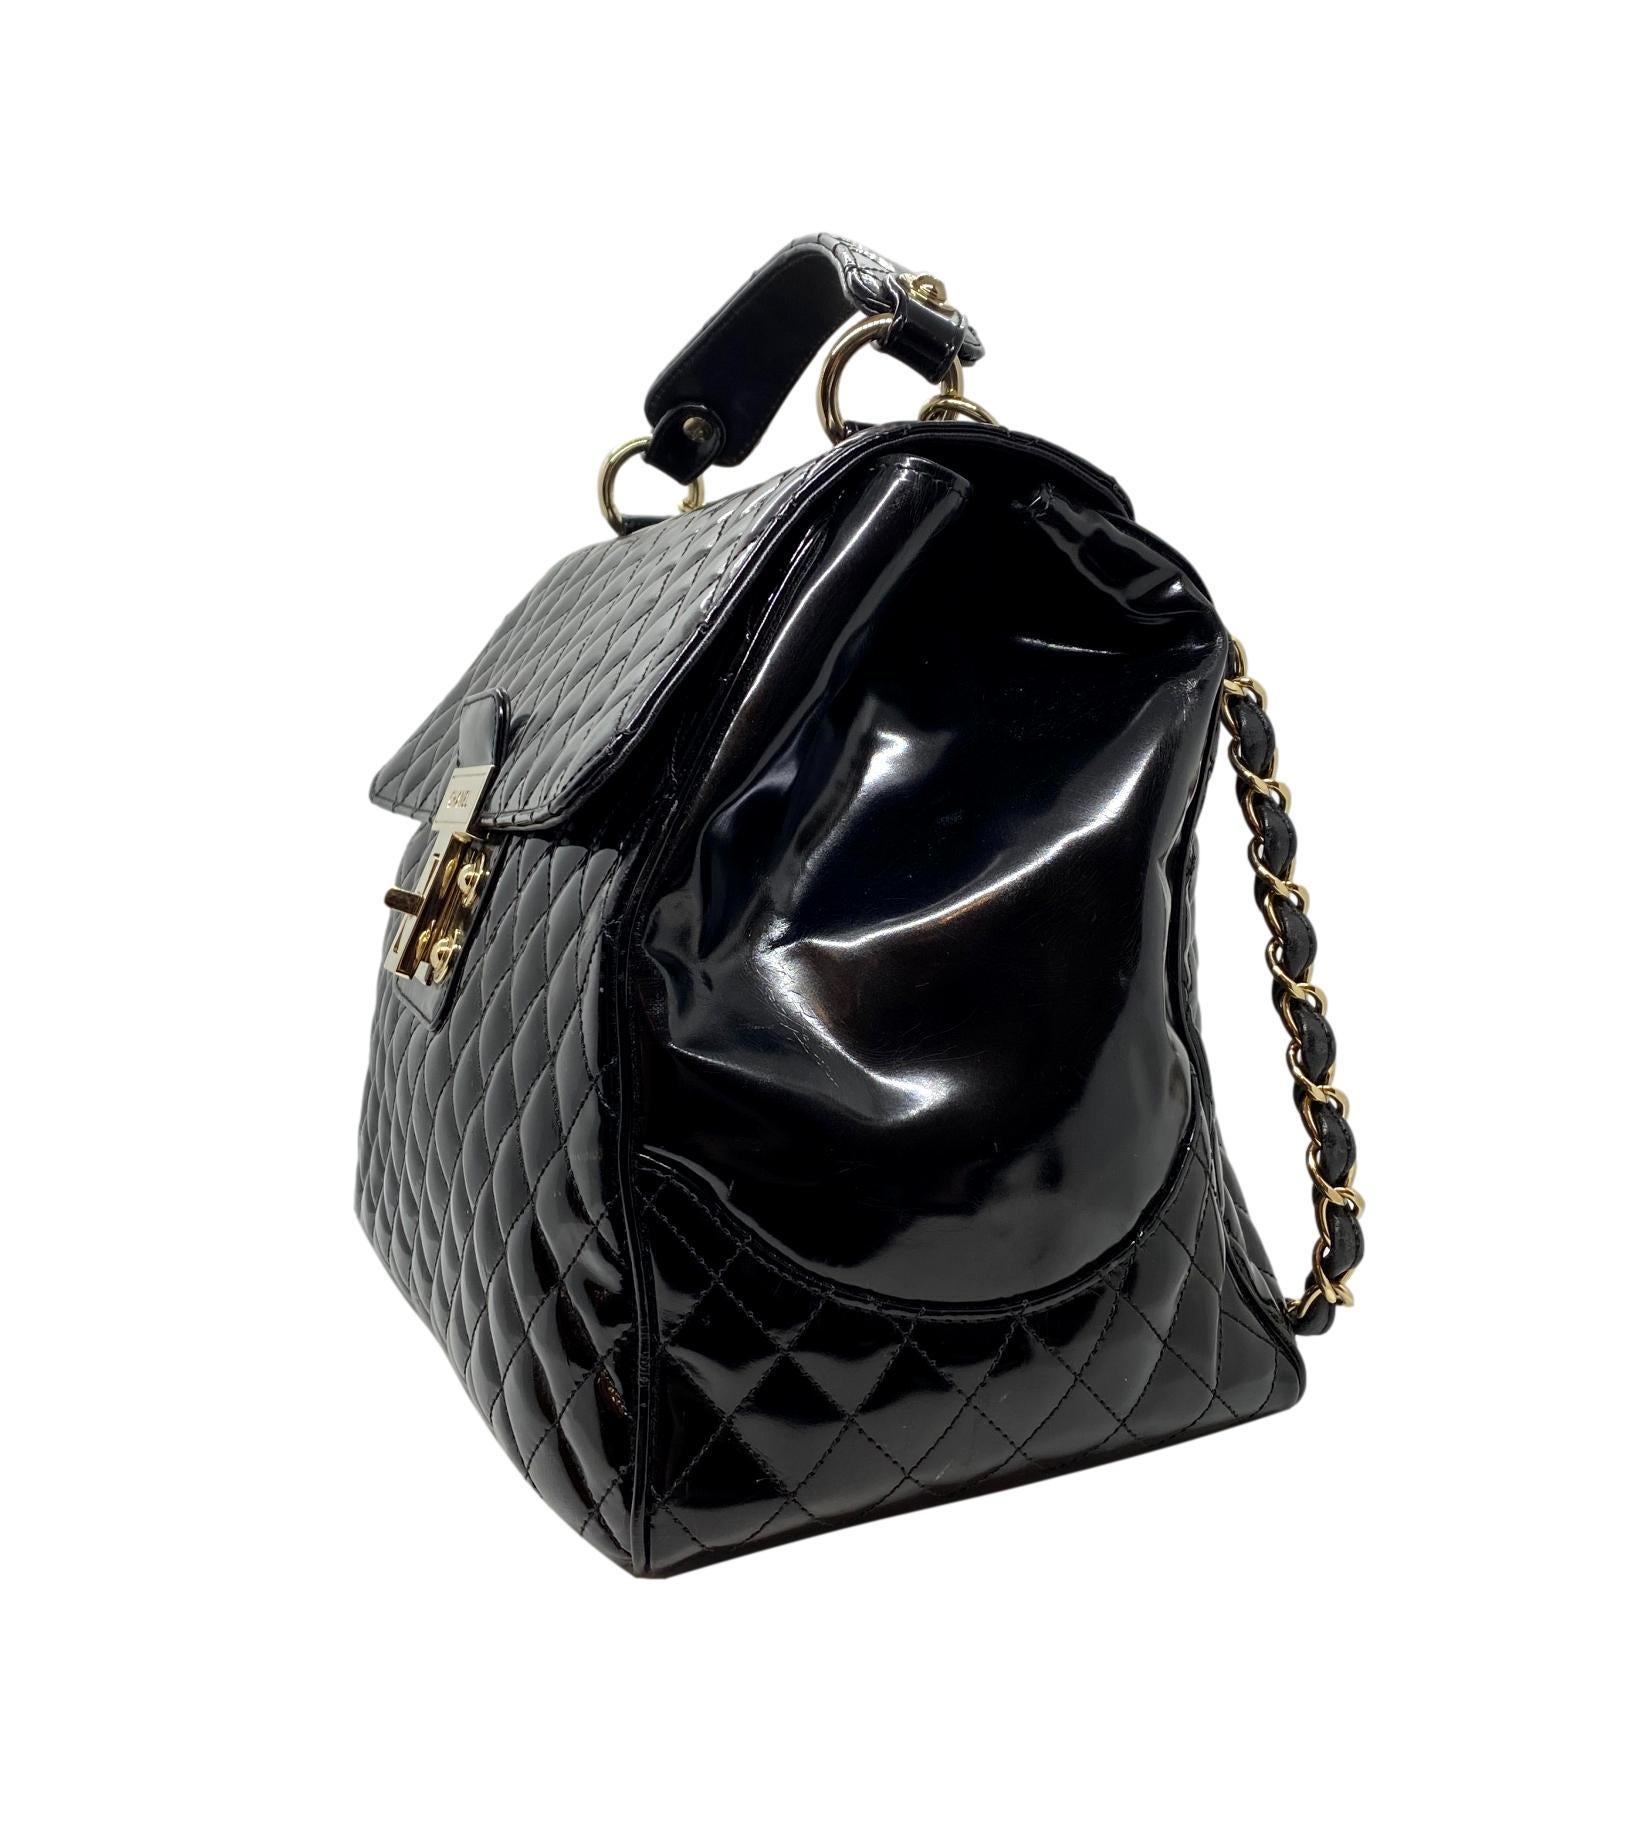 Chanel Glazed Lambskin Quilted Mademoiselle Kelly Top Handle Shoulder Bag, 2009. The iconic Chanel bag was originally issued by Coco Chanel in February 1955 which became the very first socially acceptable shoulder bag for the modern-day woman of